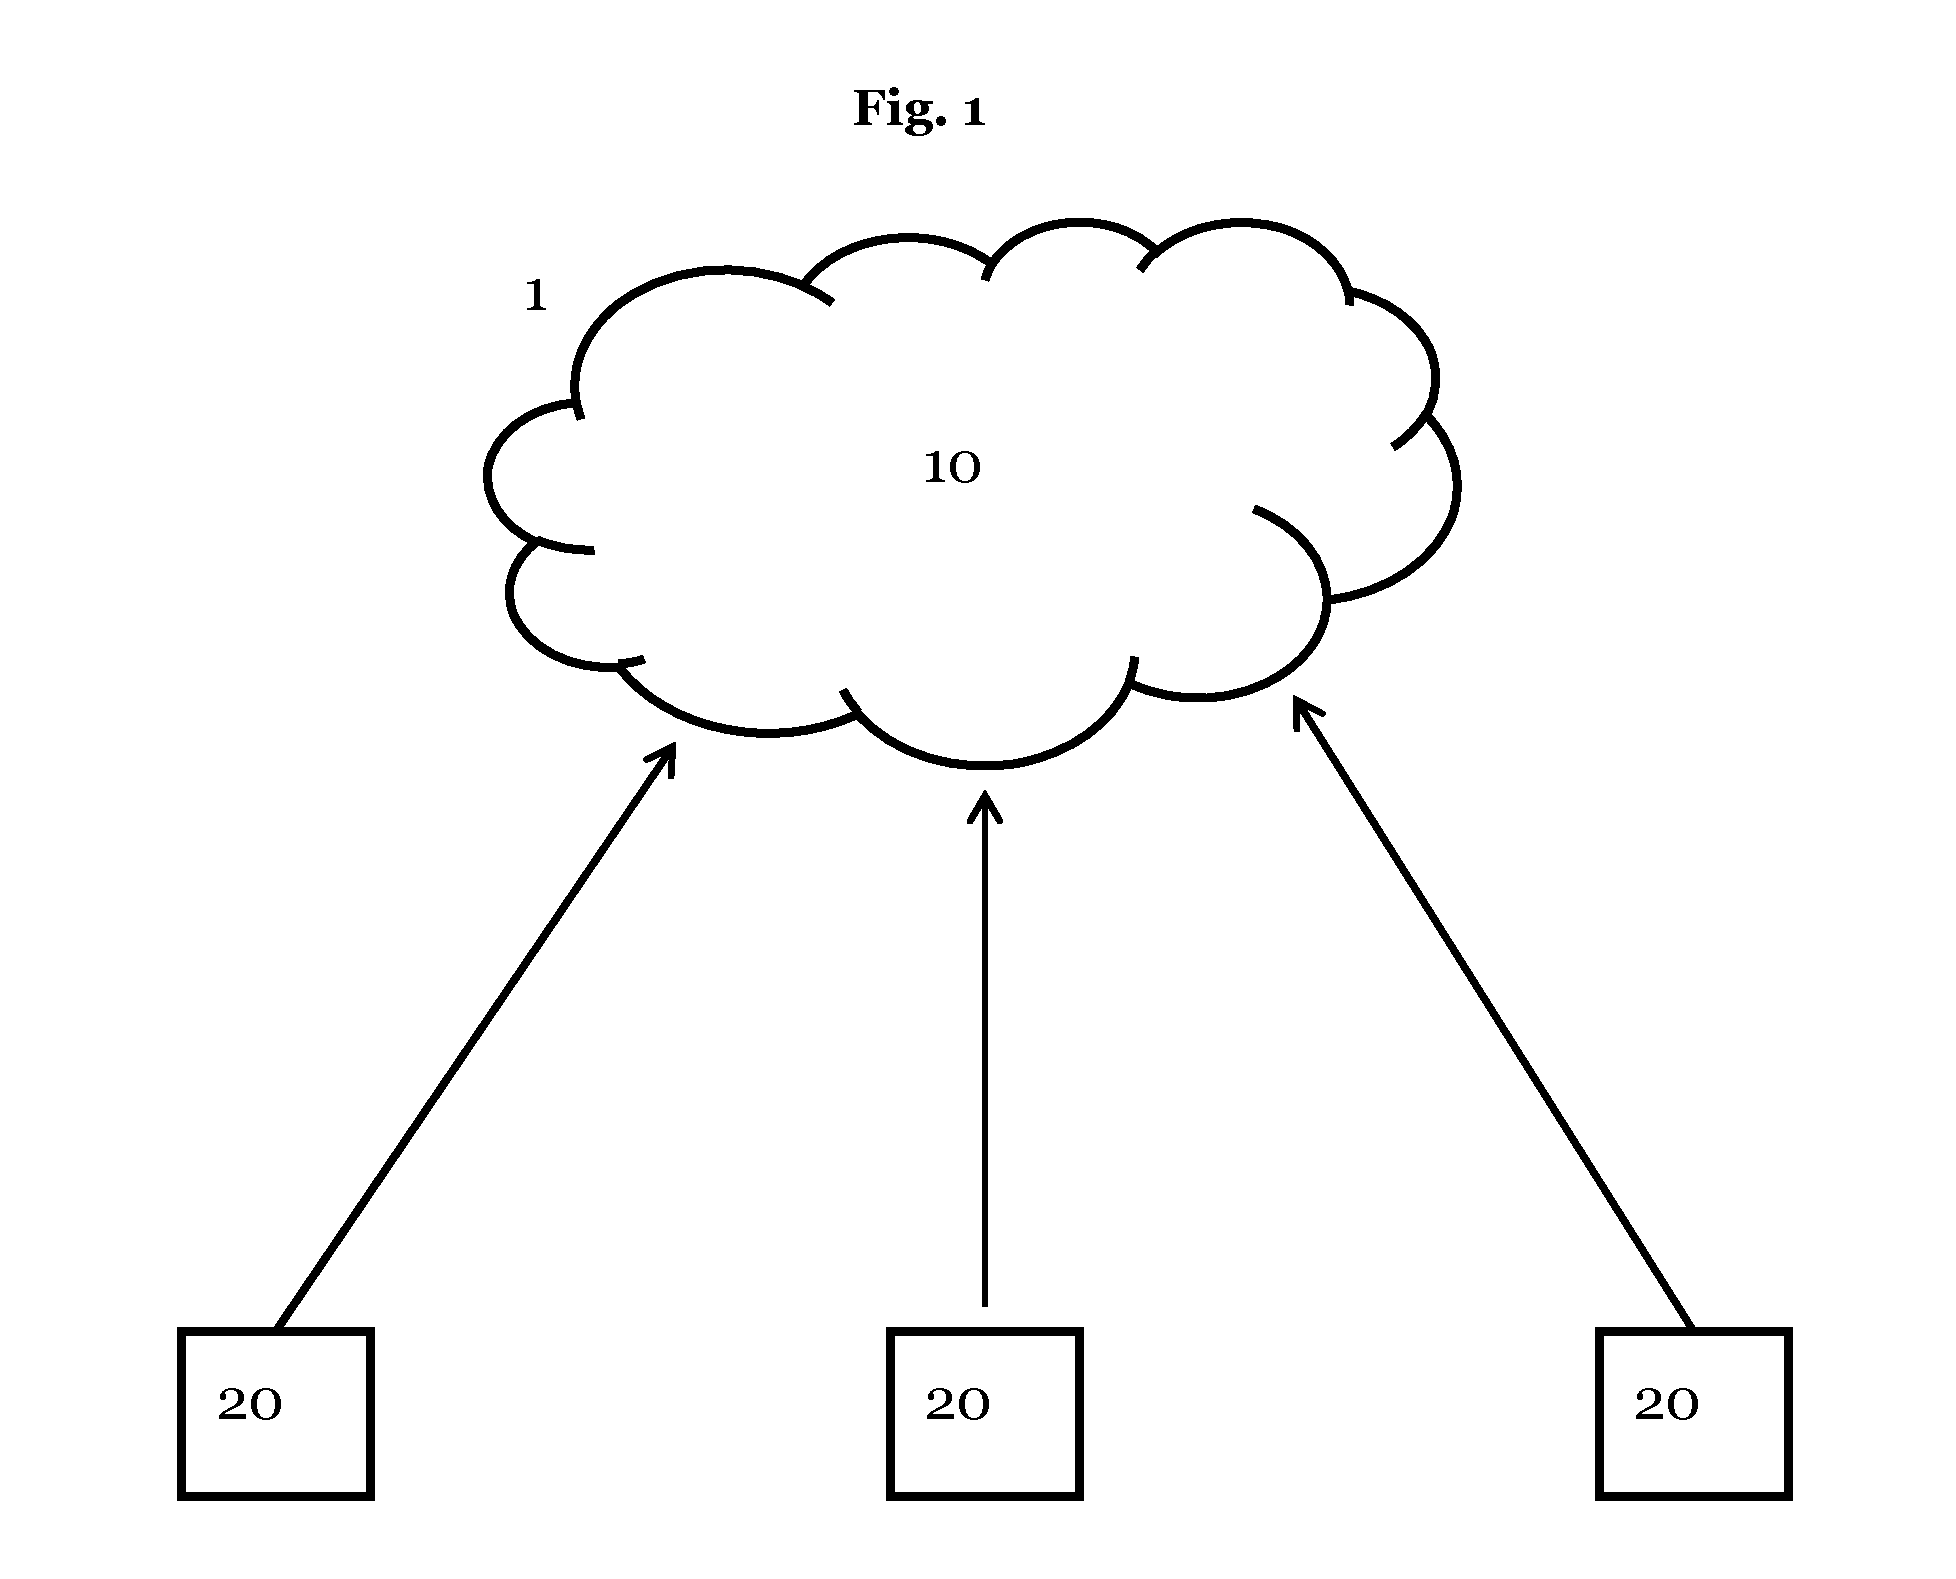 Method and system for allocating resources to resource consumers in a cloud computing environment